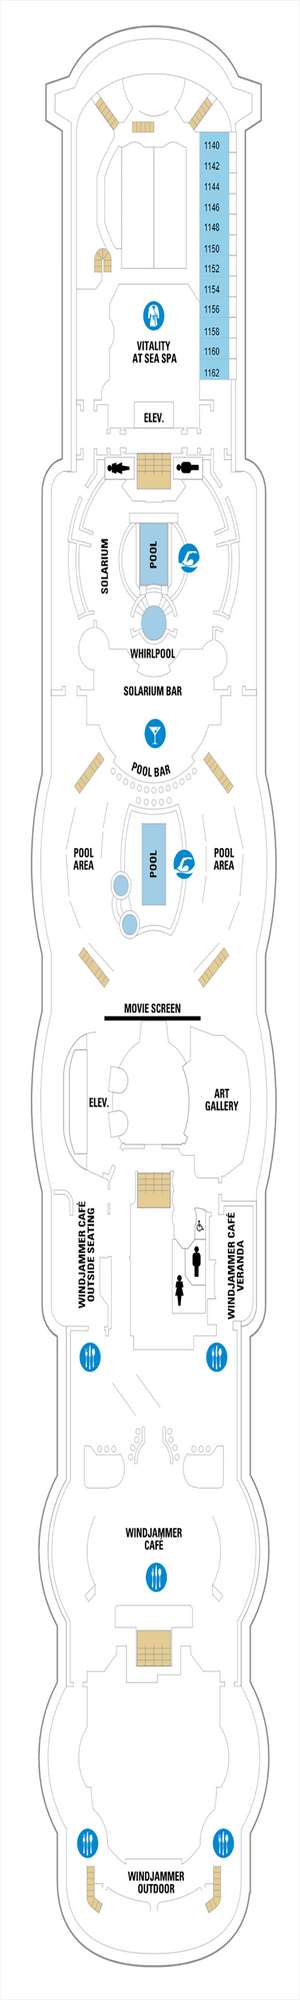 Deck plan for Jewel of the Seas